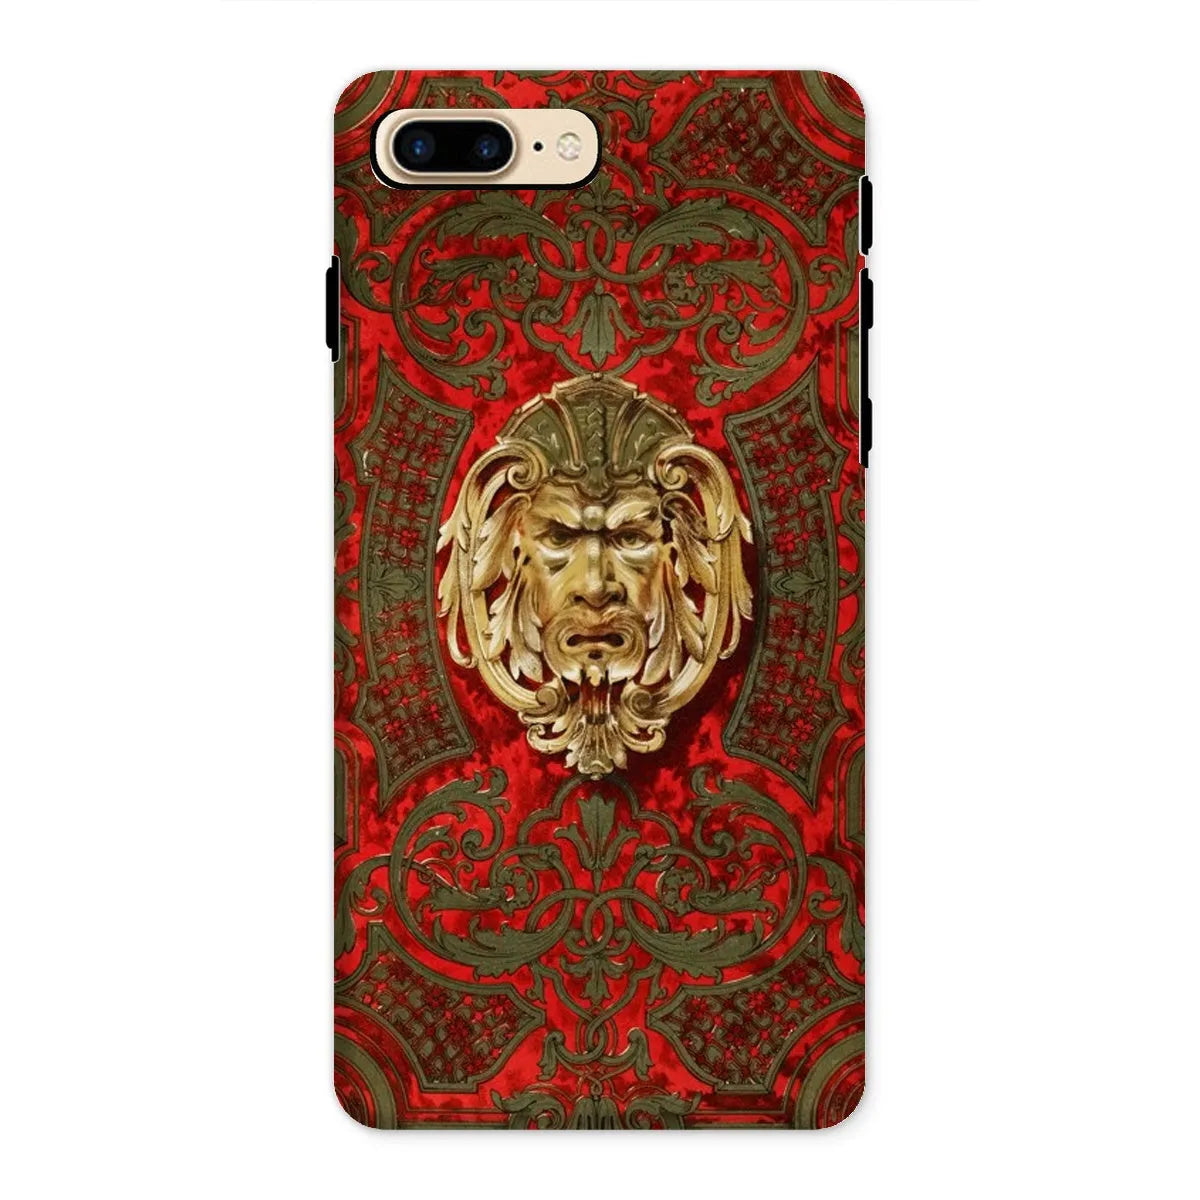 Panel In Buhl Victorian Art Phone Case - Matthew Digby Wyatt - Iphone 8 Plus / Matte - Mobile Phone Cases - Aesthetic